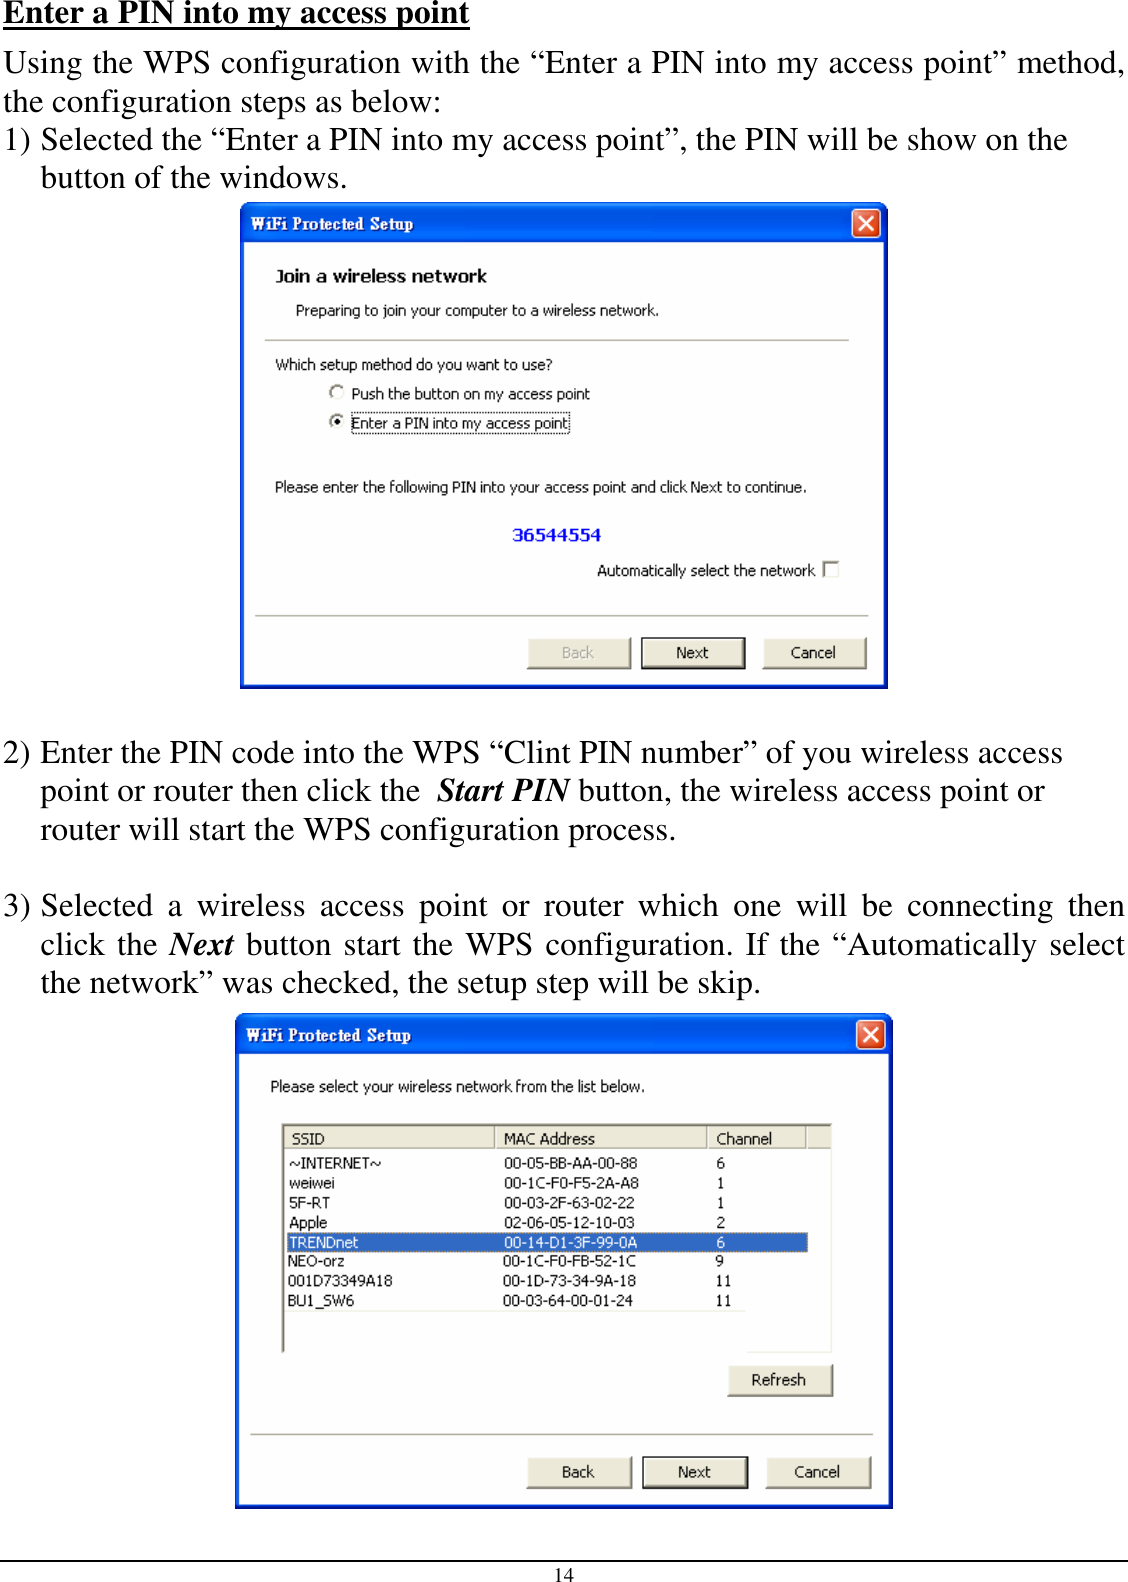  14 Enter a PIN into my access point Using the WPS configuration with the “Enter a PIN into my access point” method, the configuration steps as below: 1) Selected the “Enter a PIN into my access point”, the PIN will be show on the button of the windows.   2) Enter the PIN code into the WPS “Clint PIN number” of you wireless access point or router then click the  Start PIN button, the wireless access point or router will start the WPS configuration process.  3) Selected  a  wireless  access  point  or  router  which  one  will  be  connecting  then click the Next button start the WPS configuration. If the “Automatically select the network” was checked, the setup step will be skip.  